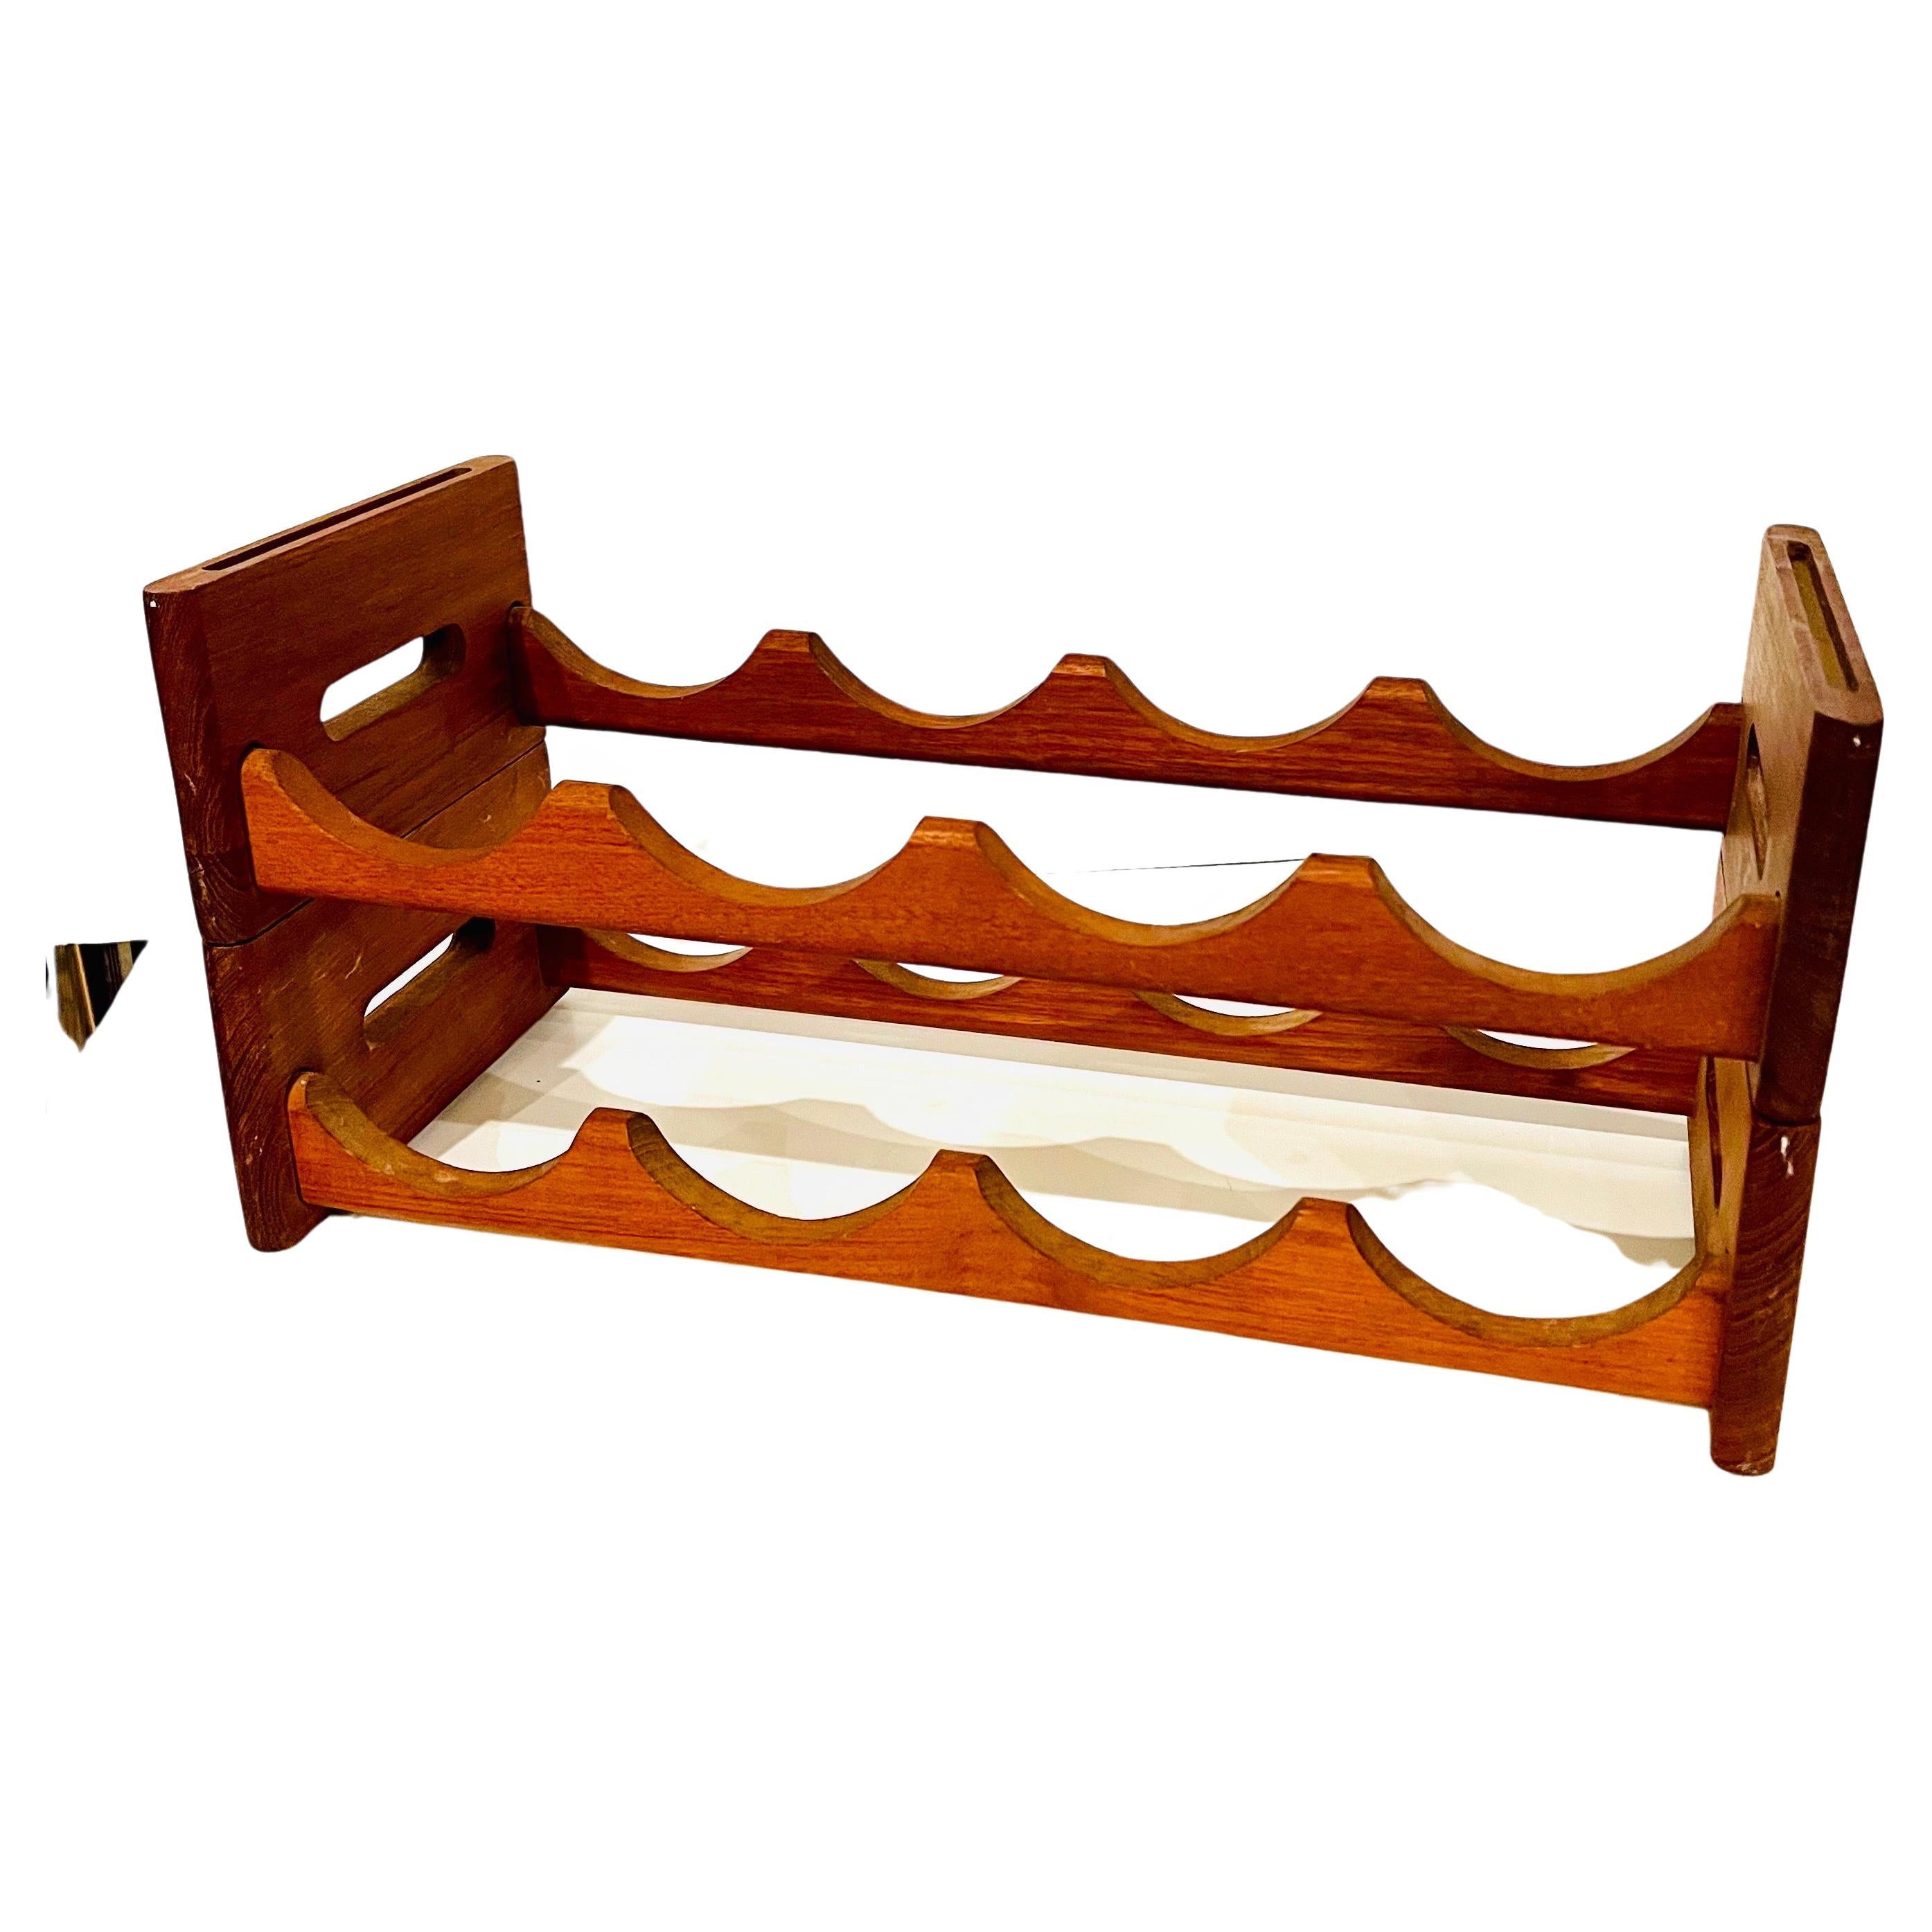 Midcentury stackable solid teak wine rack by Kalmar Designs, circa the 1970s. This double rack can hold up to 8 bottles and can be used one on top of the other or side by side.